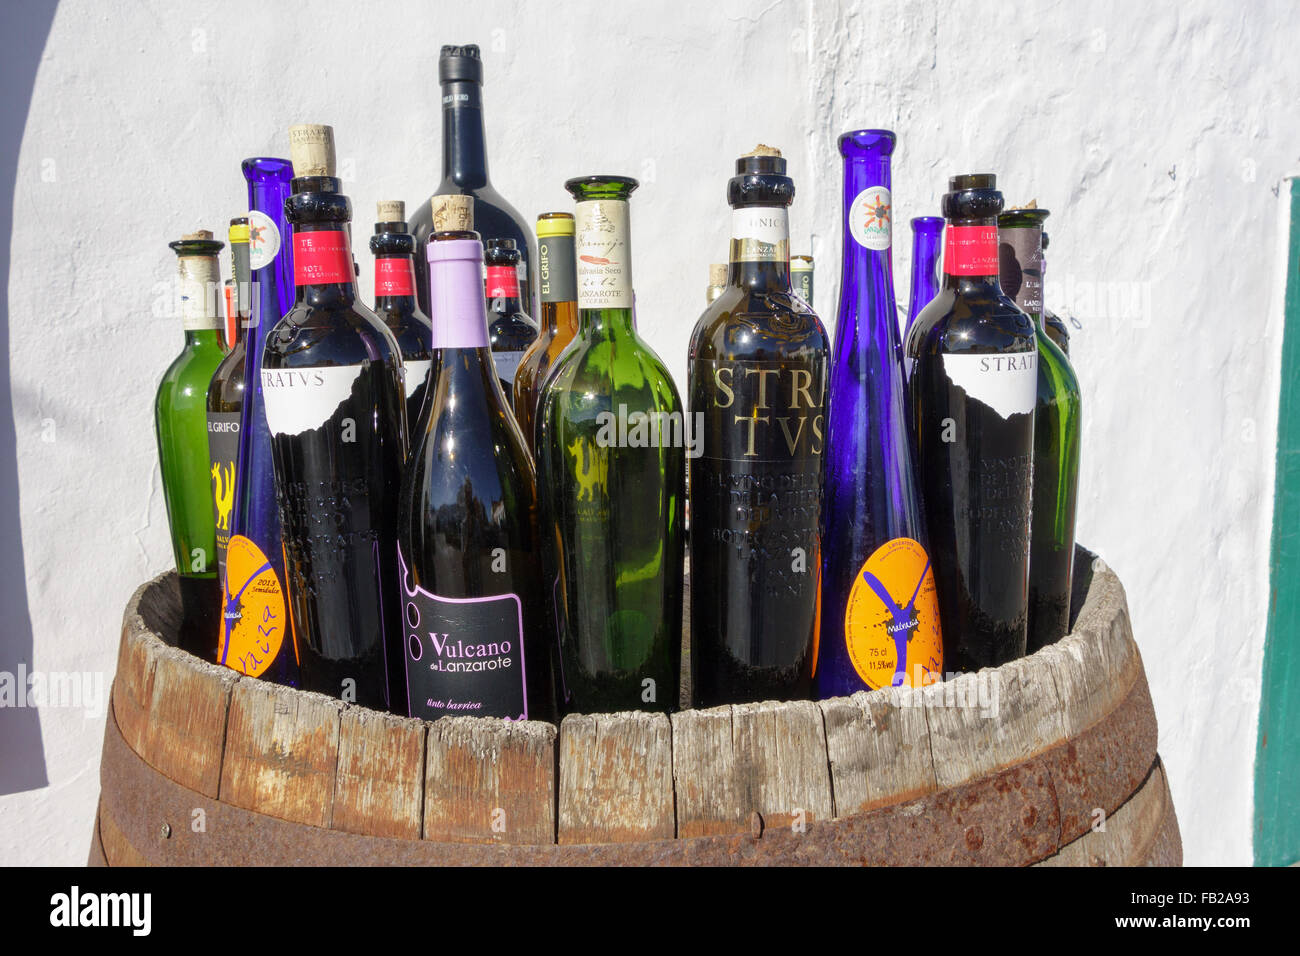 Spain, Lanzarote, Teguise. Outside display of locally produced bottles of wine for sale. Stock Photo